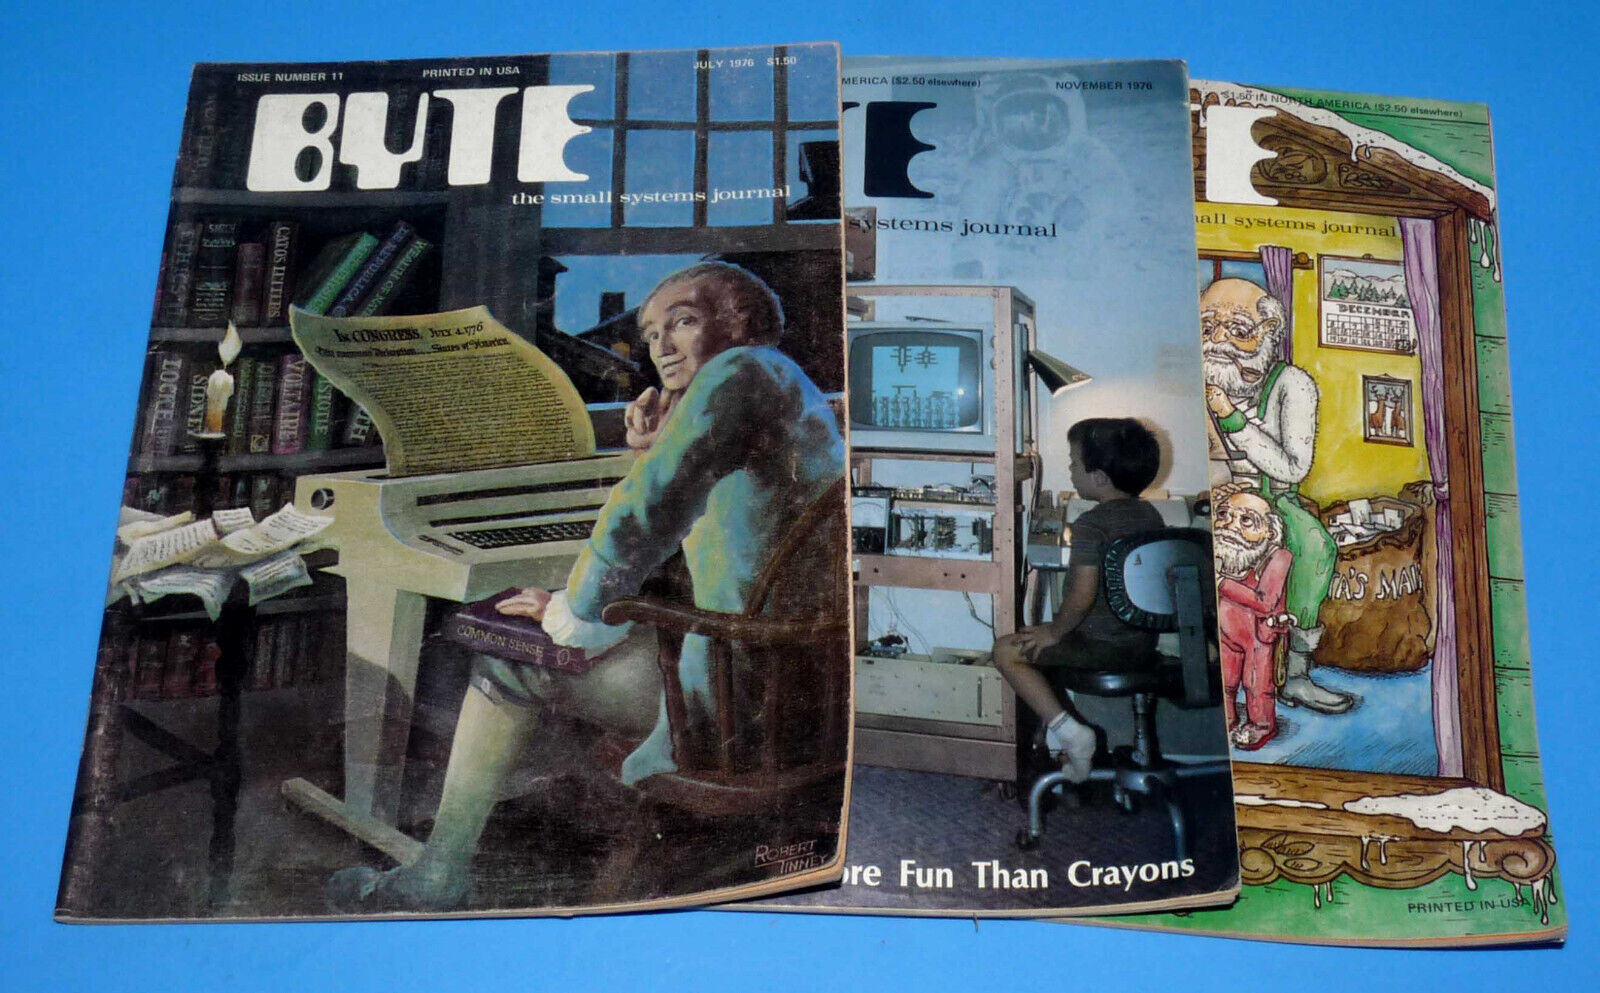 BYTE Magazine The Small Systems Journal Issues 11, 15 and 16 - 1976